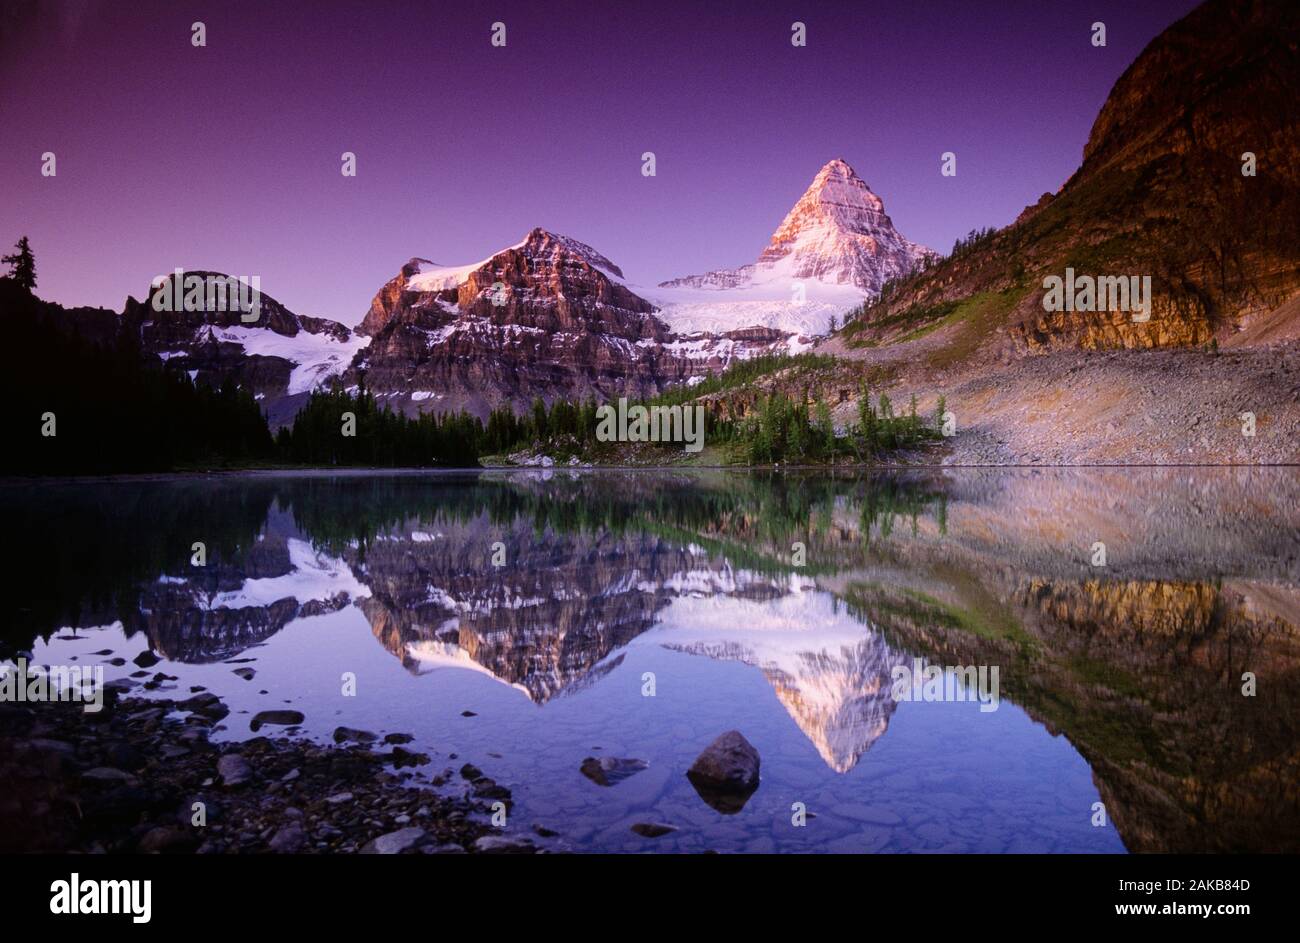 Landscape with lake and mountains, Mt. Assiniboine Provincial Park, British Columbia, Canada Stock Photo